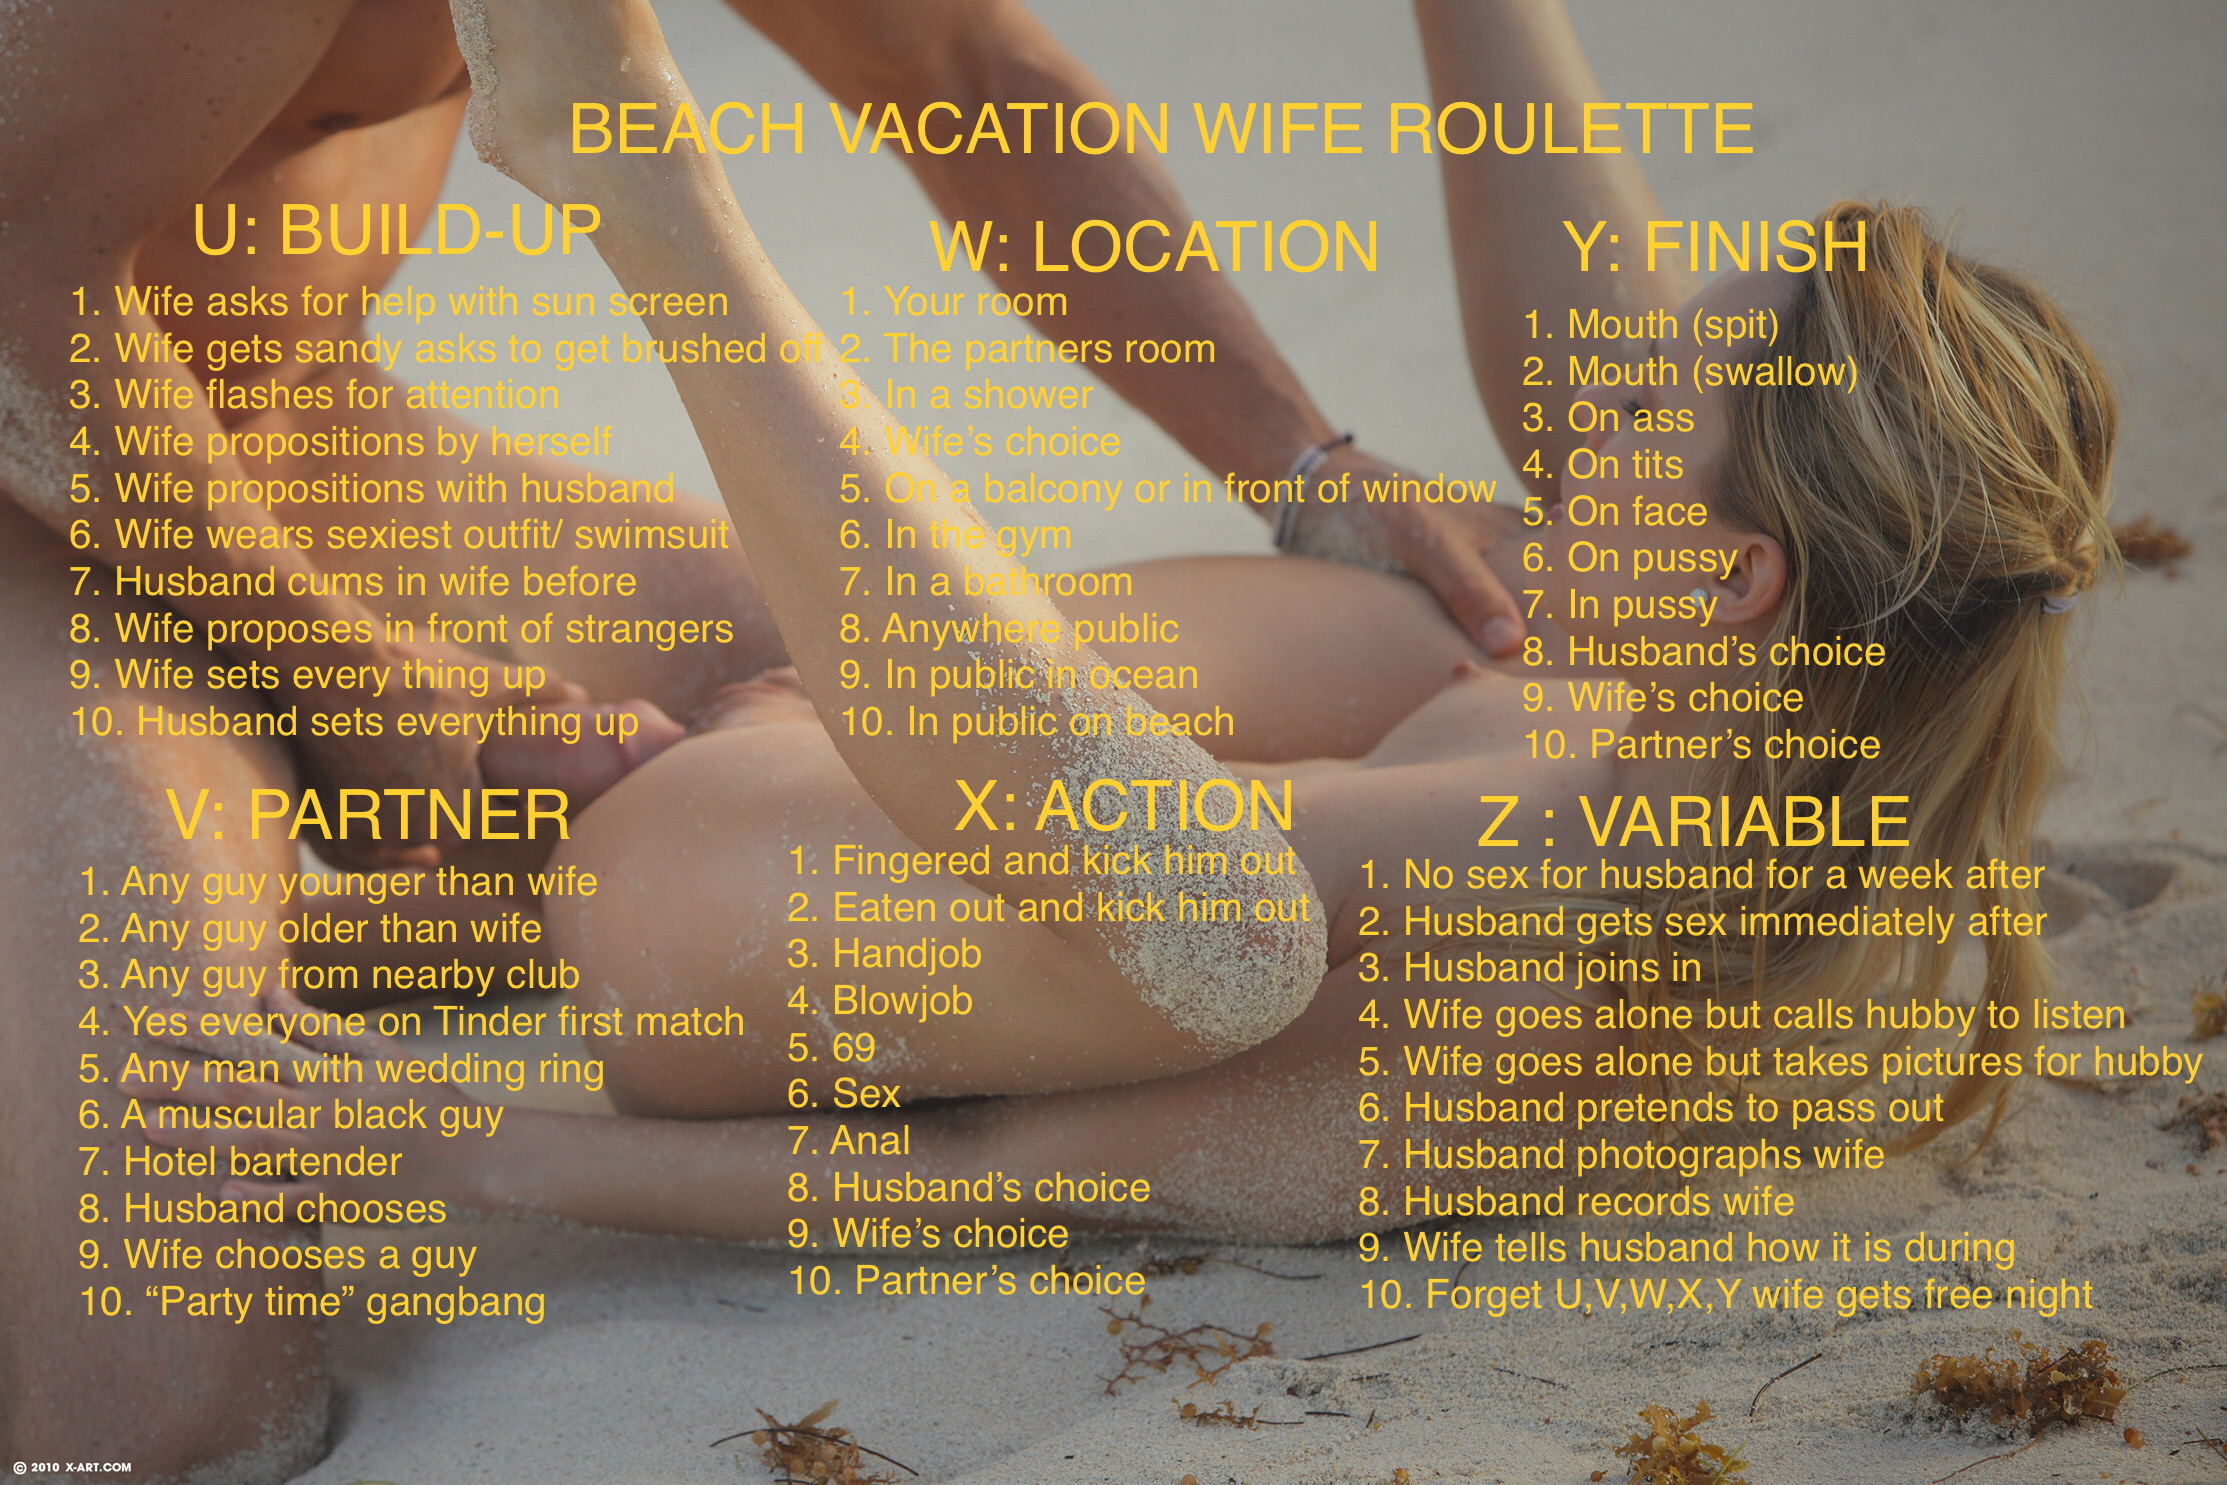 Beach vacation wife roulette image